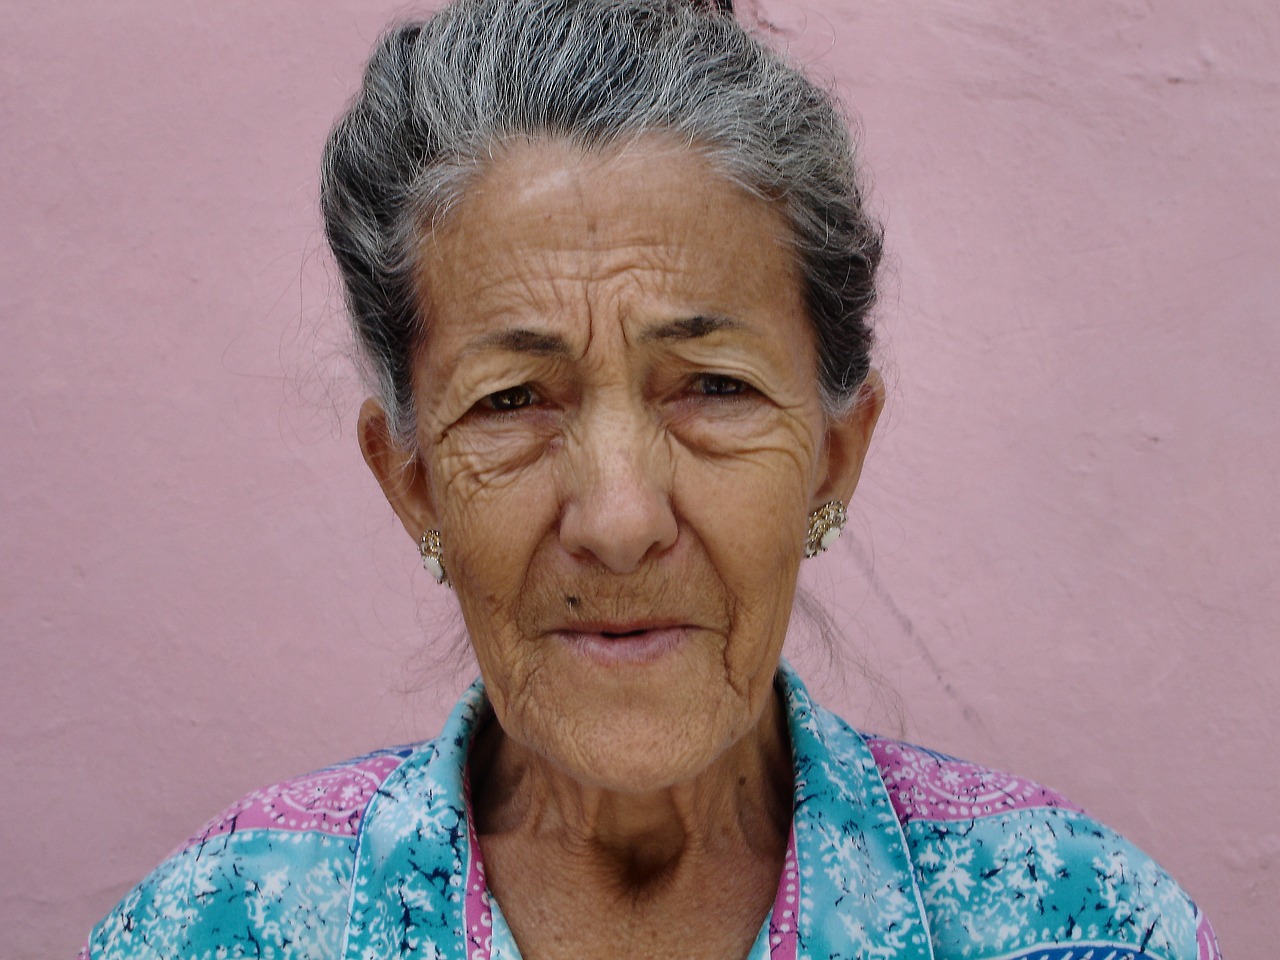 Woman,old,wrinkled,old woman,portrait - free image from needpix.com